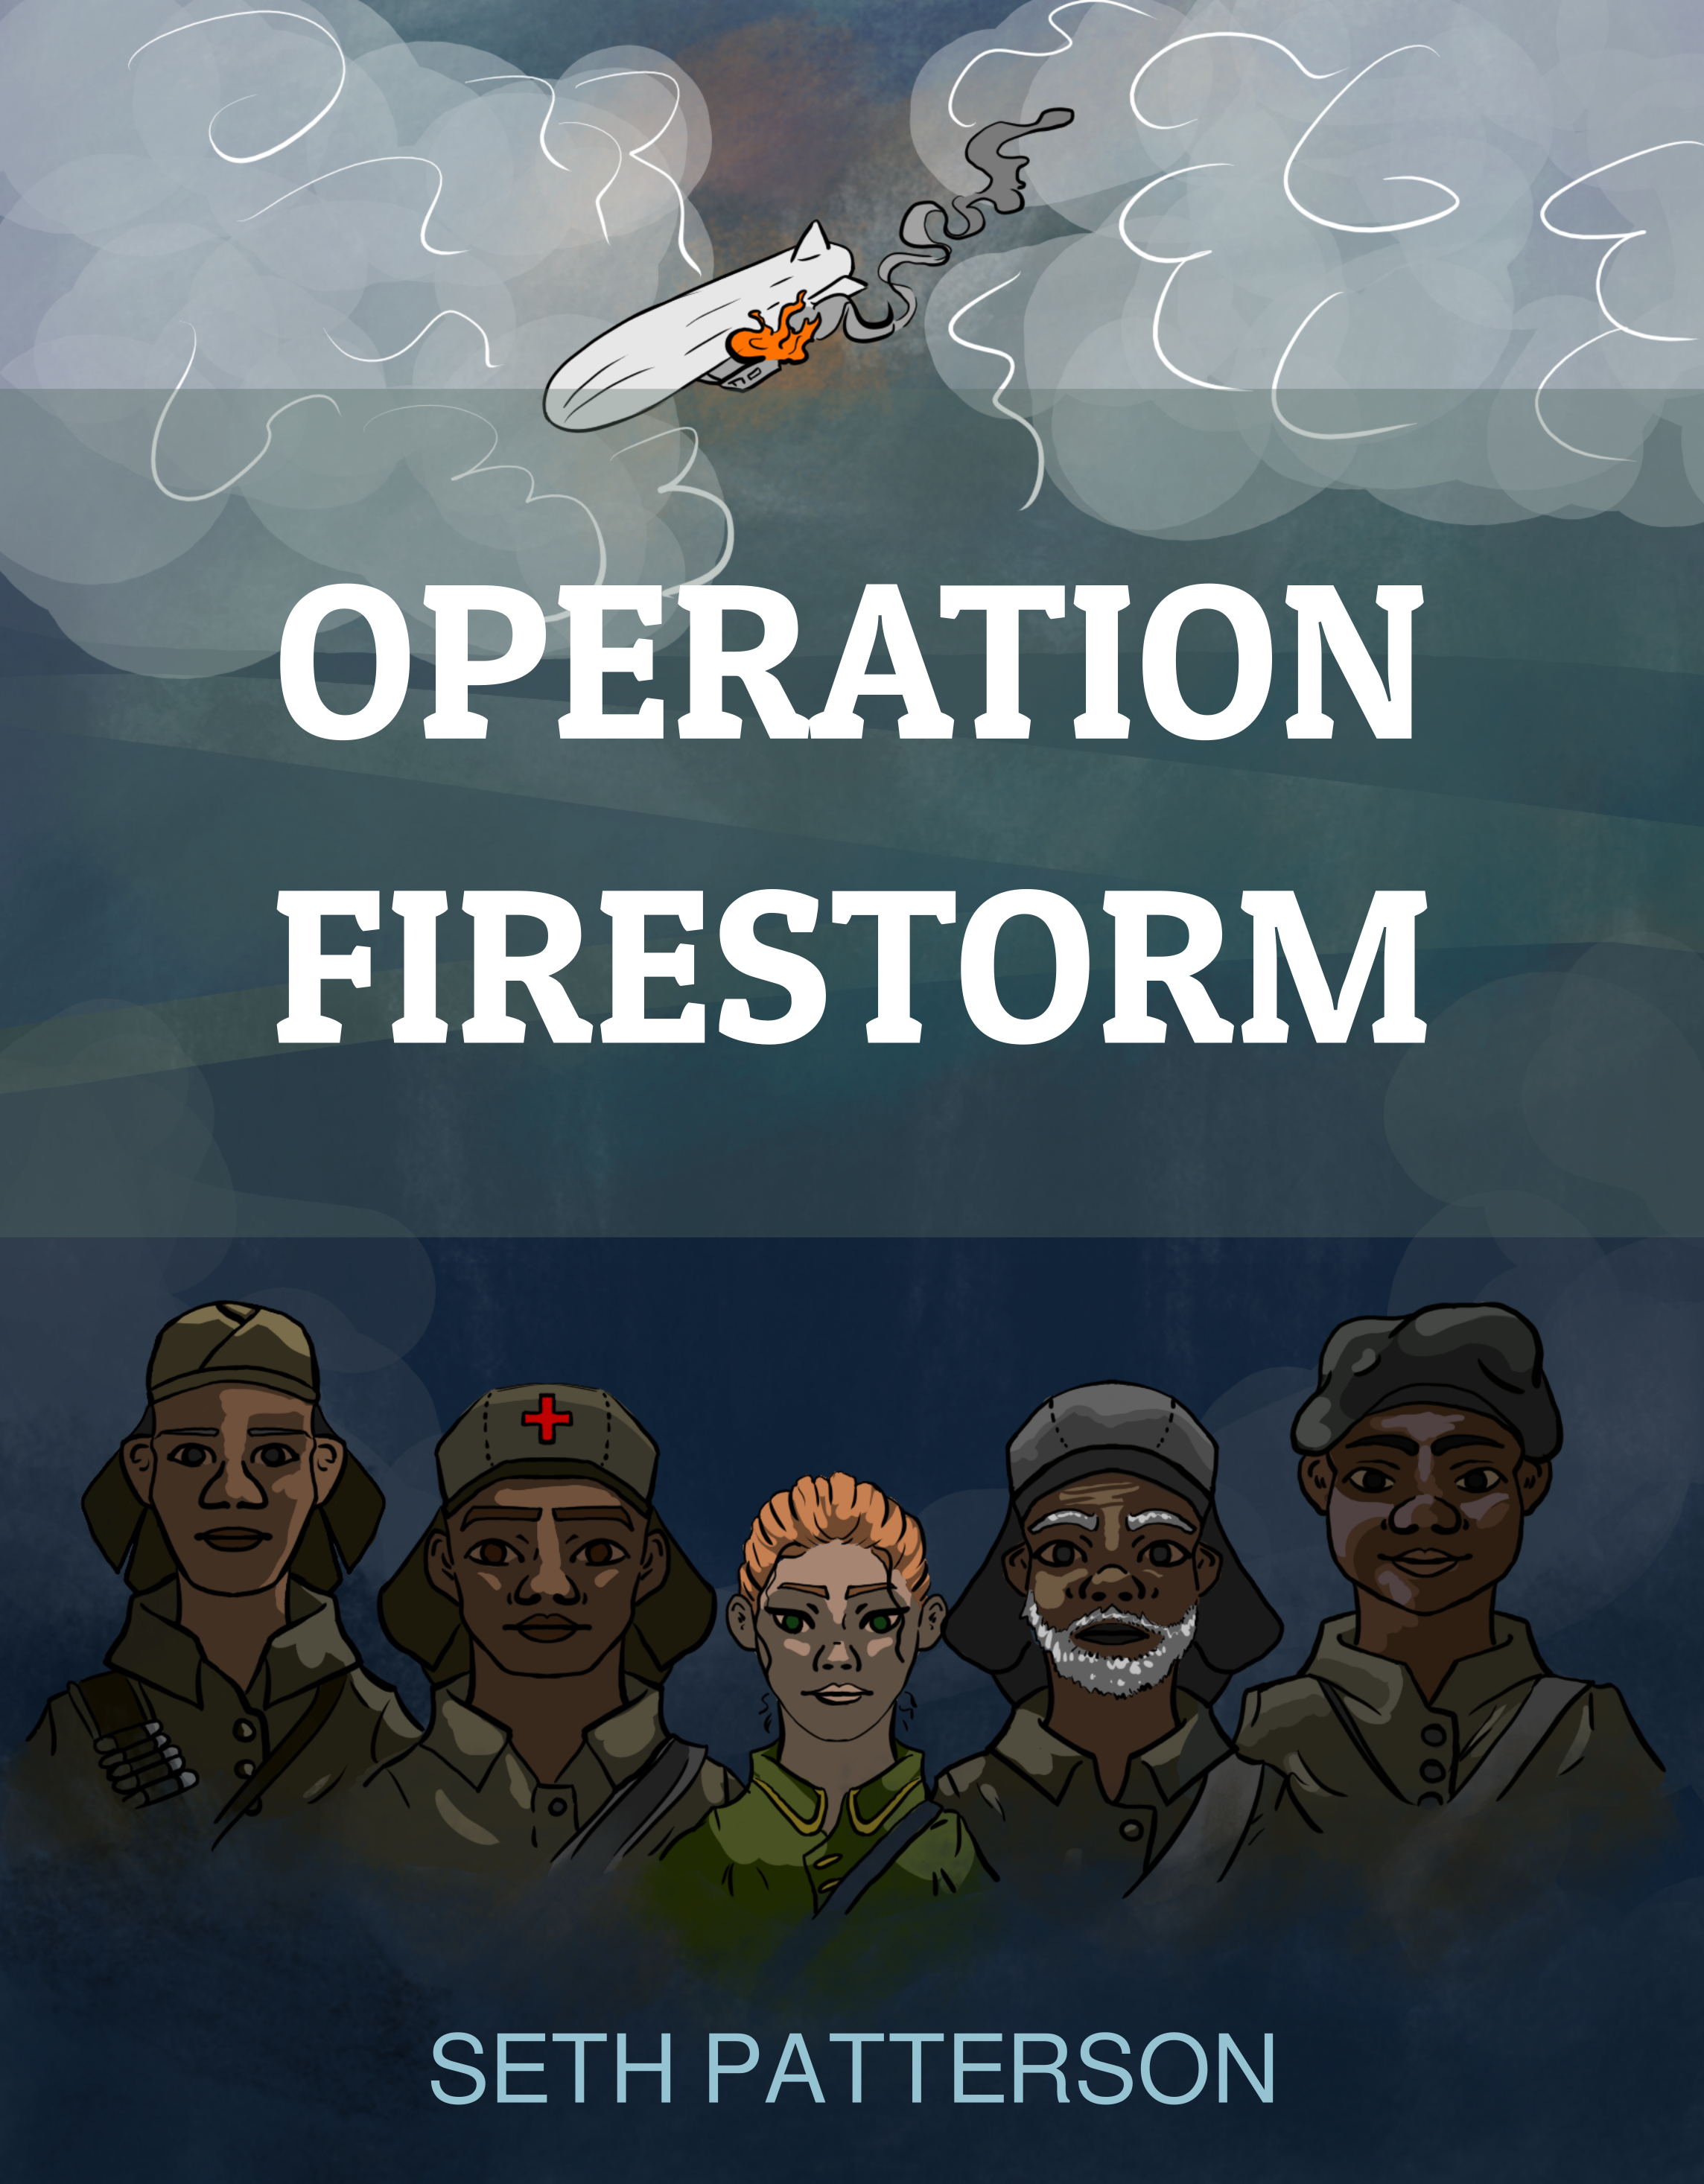 Illustrated book cover: Atop the page, a burning airship hurtles to the ground. At the bottom are five soldiers (Hard, Cougar, Sgt. Desmond Alish, Cotton, and Song). Hard wears a sunhat and bandolier. Cougar’s hat has a medic’s cross on it. Sgt. Alish has a red-blond ponytail and a light green uniform. Cotton has a white beard and sunhat. Song has a baby face and lumpy cap.